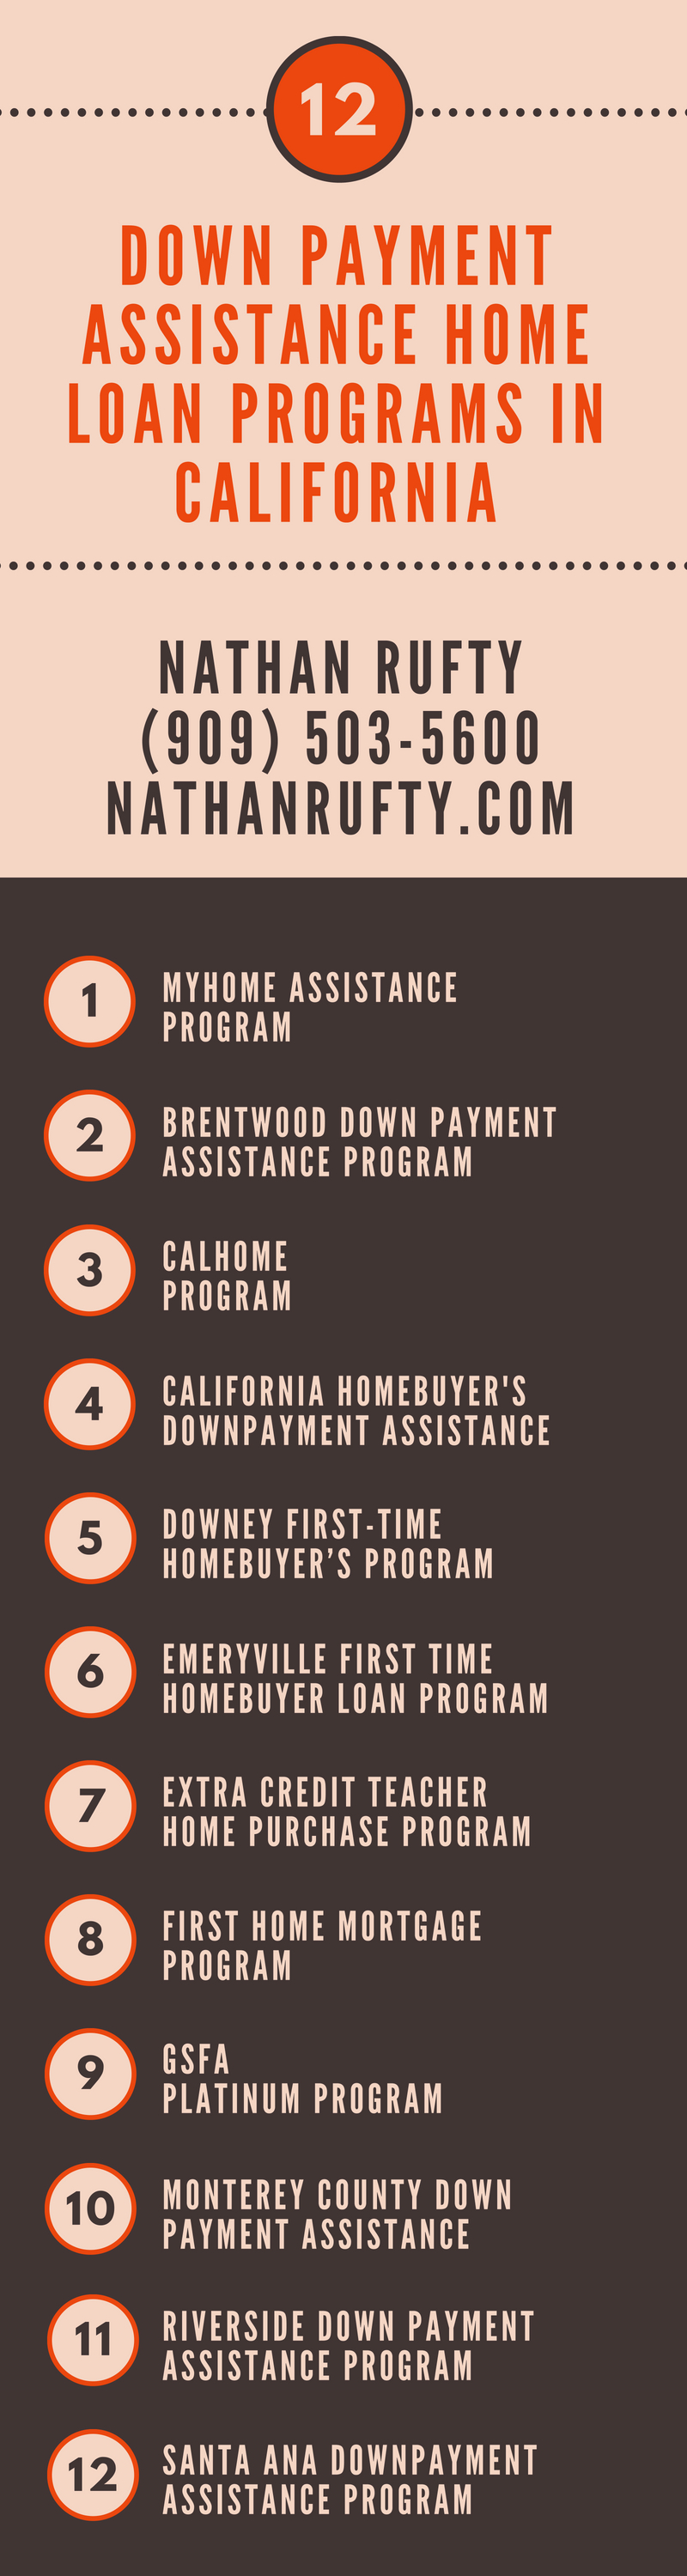 Down Payment Assistance Home Loan Programs in California